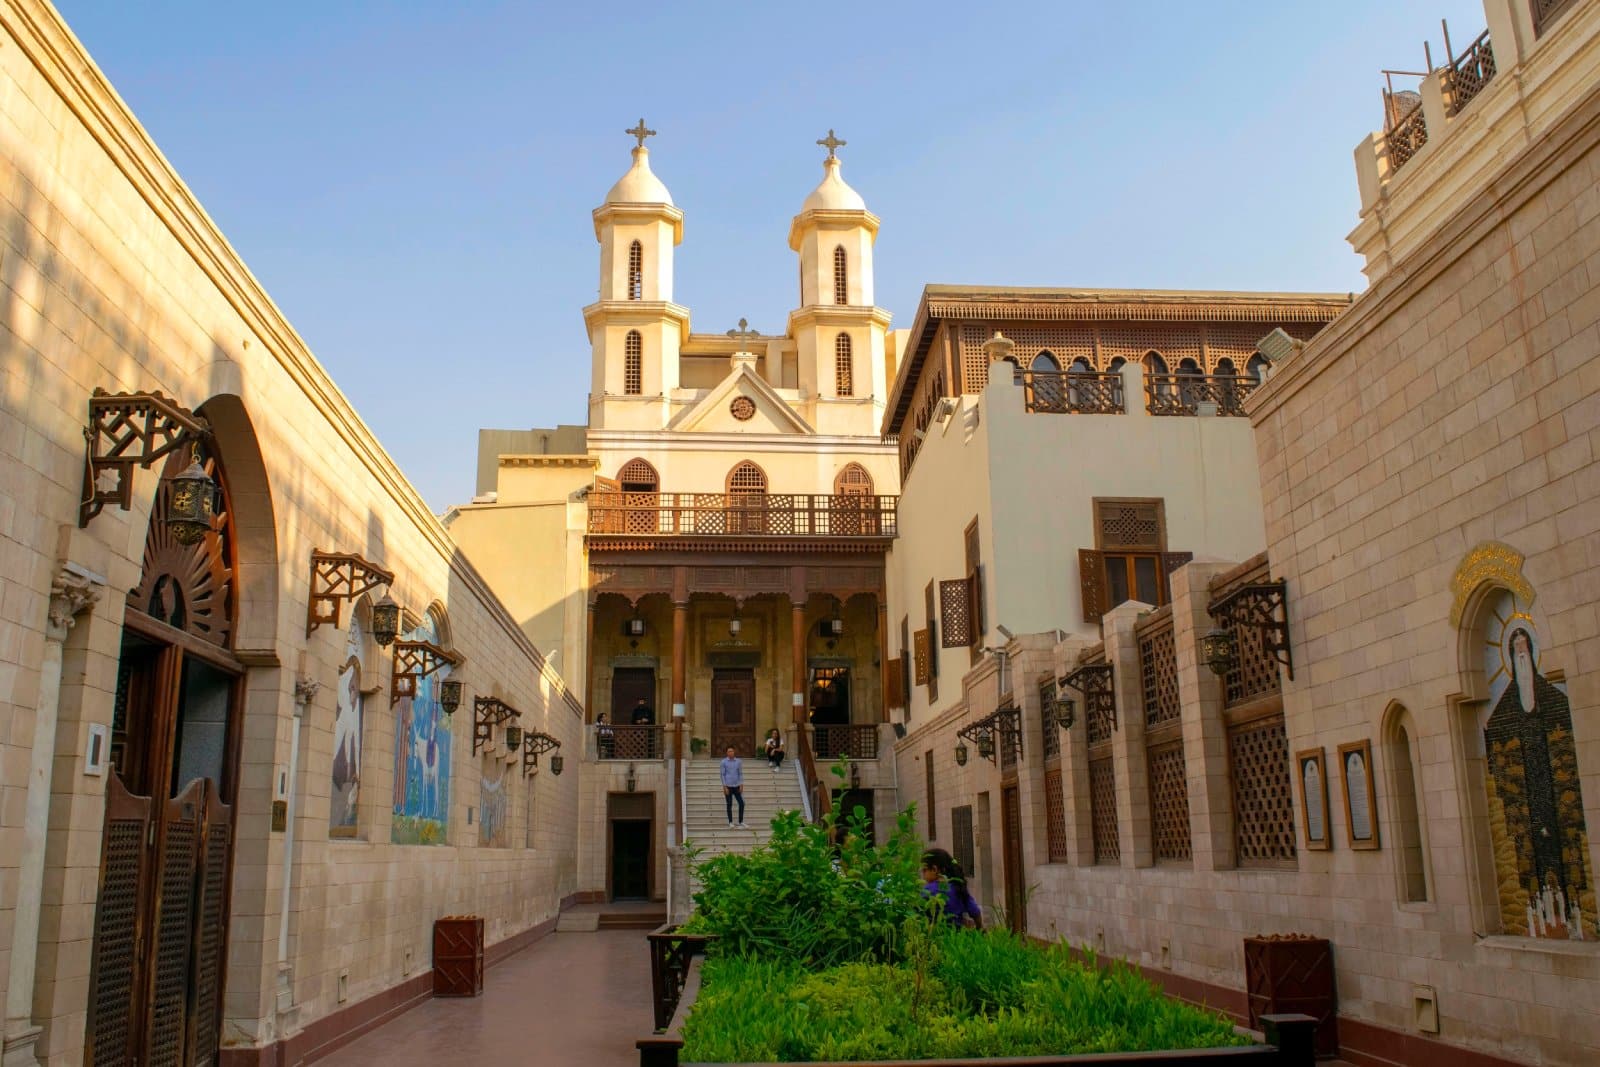 <p class="wp-caption-text">Image Credit: Shutterstock / ViktoriyaFivko</p>  <p><span>The Hanging Church, officially known as Saint Virgin Mary’s Coptic Orthodox Church, is one of Cairo’s most revered Christian sites. Built in the 7th century and named for its location above a gatehouse of Babylon Fortress, the church is a marvel of Coptic architecture, featuring a wooden roof in the shape of Noah’s Ark and intricate screenwork. Inside, the church houses a collection of icons, relics, and manuscripts that chronicle the history of the Coptic Church in Egypt. The Hanging Church is not just a place of worship but a symbol of the enduring presence of Christianity in Egypt.</span> </p>